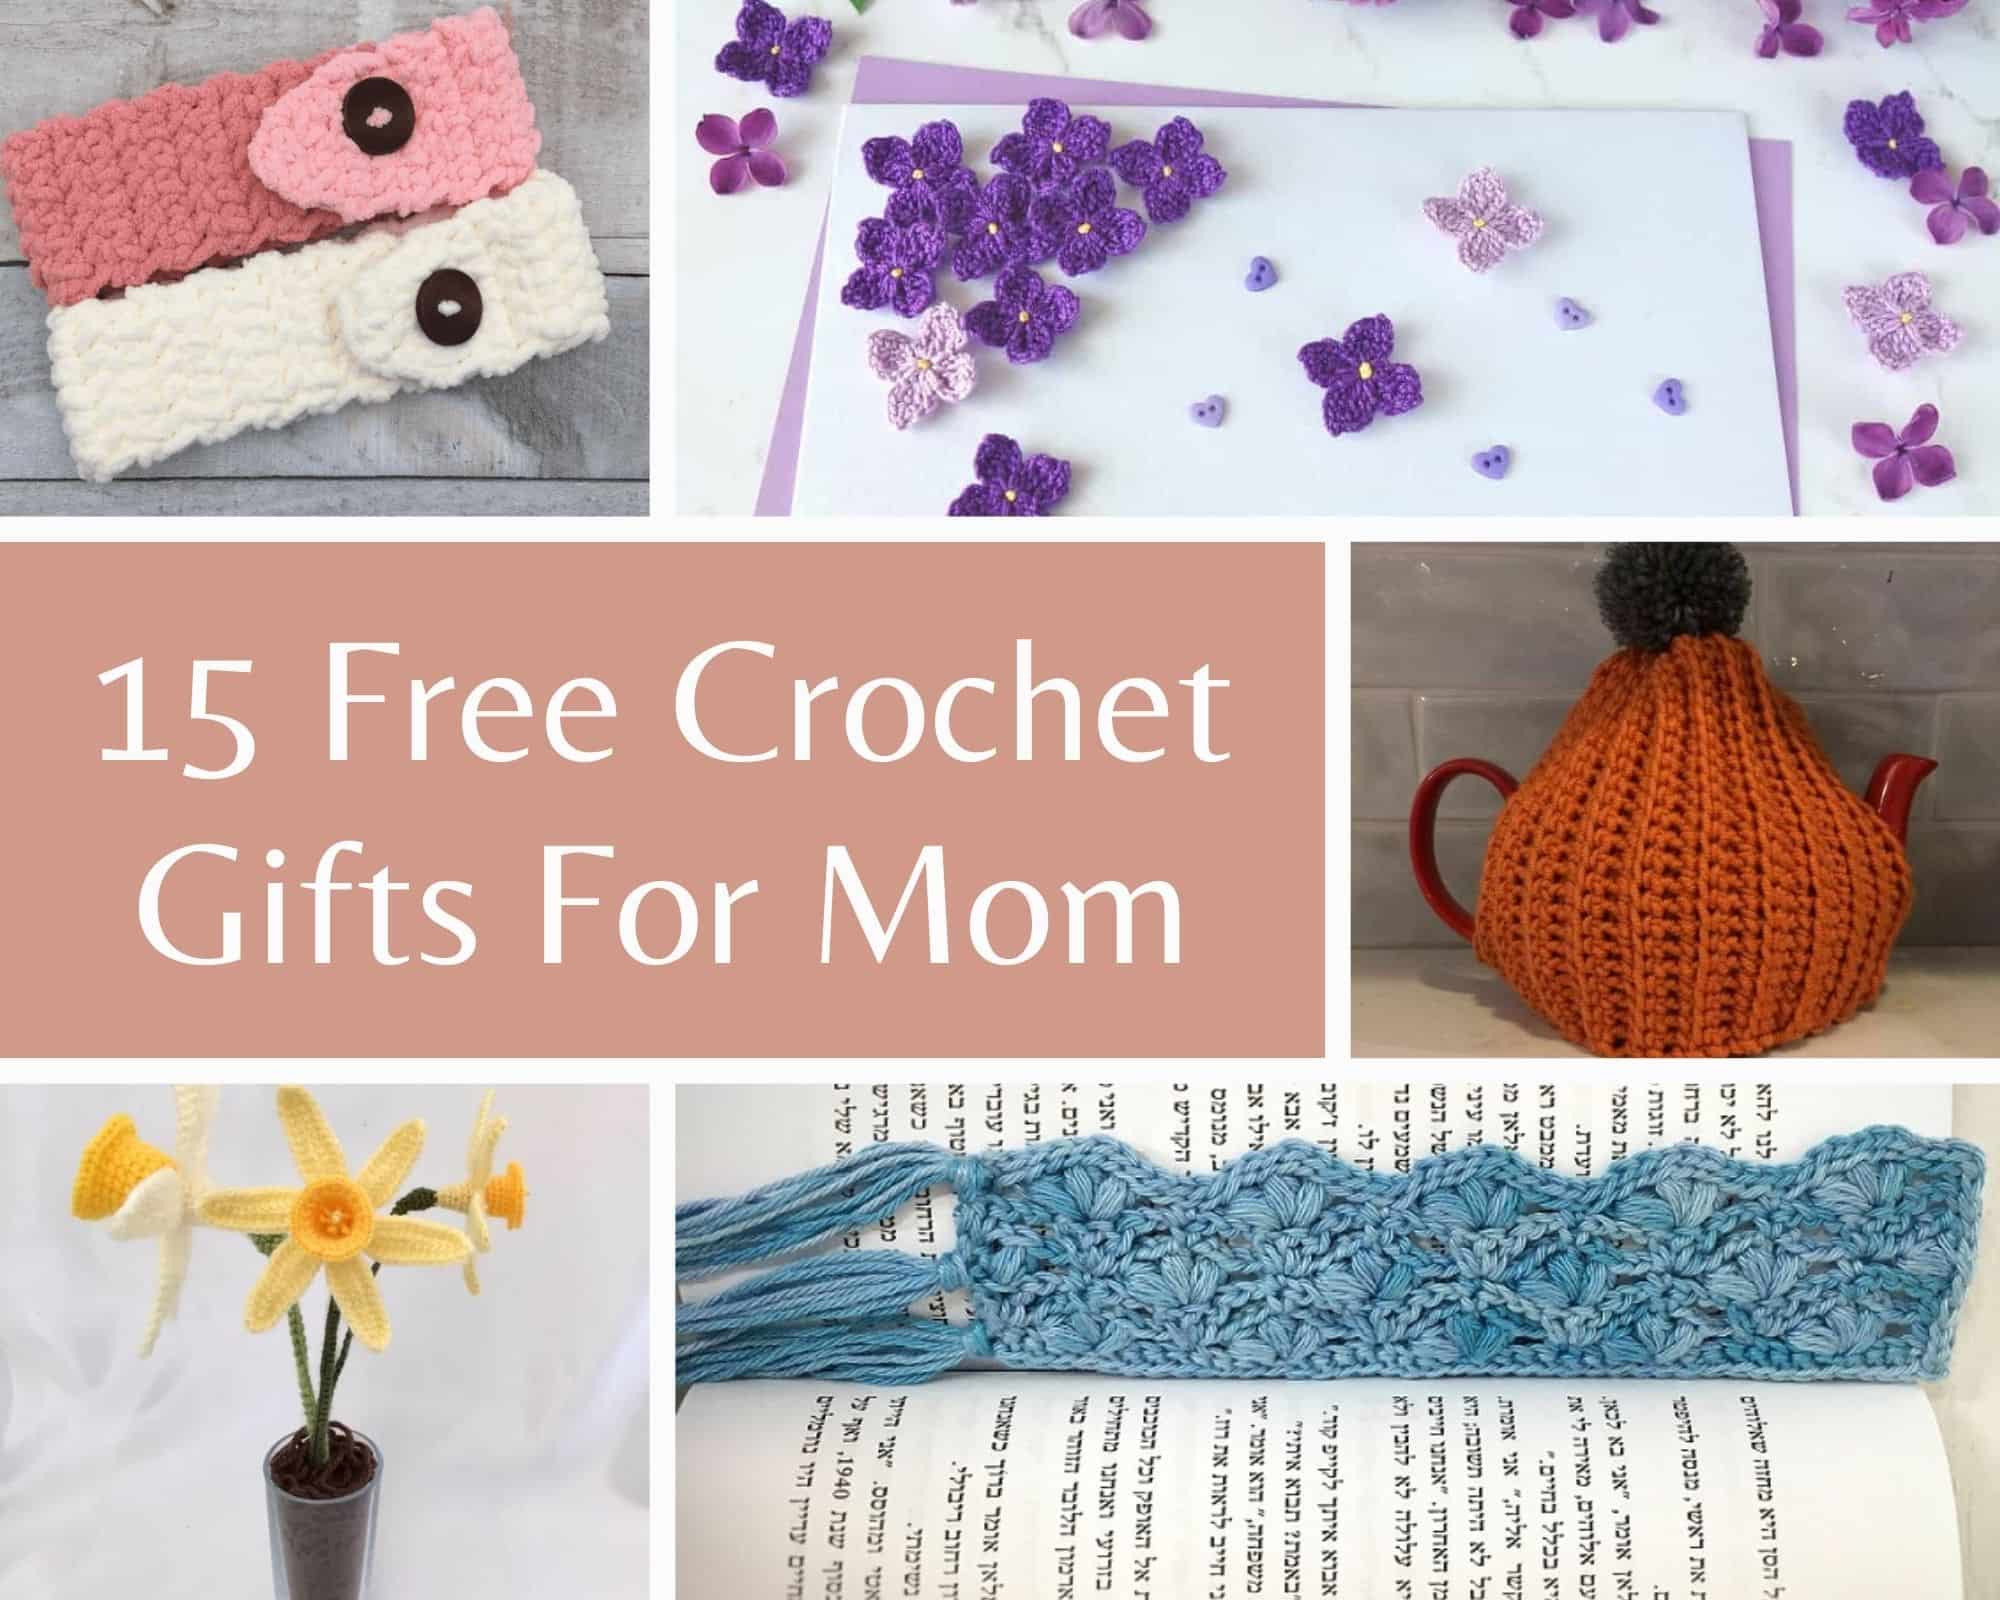 18 Quick and Easy Last Minute Crochet Gift Ideas - This Pixie Creates